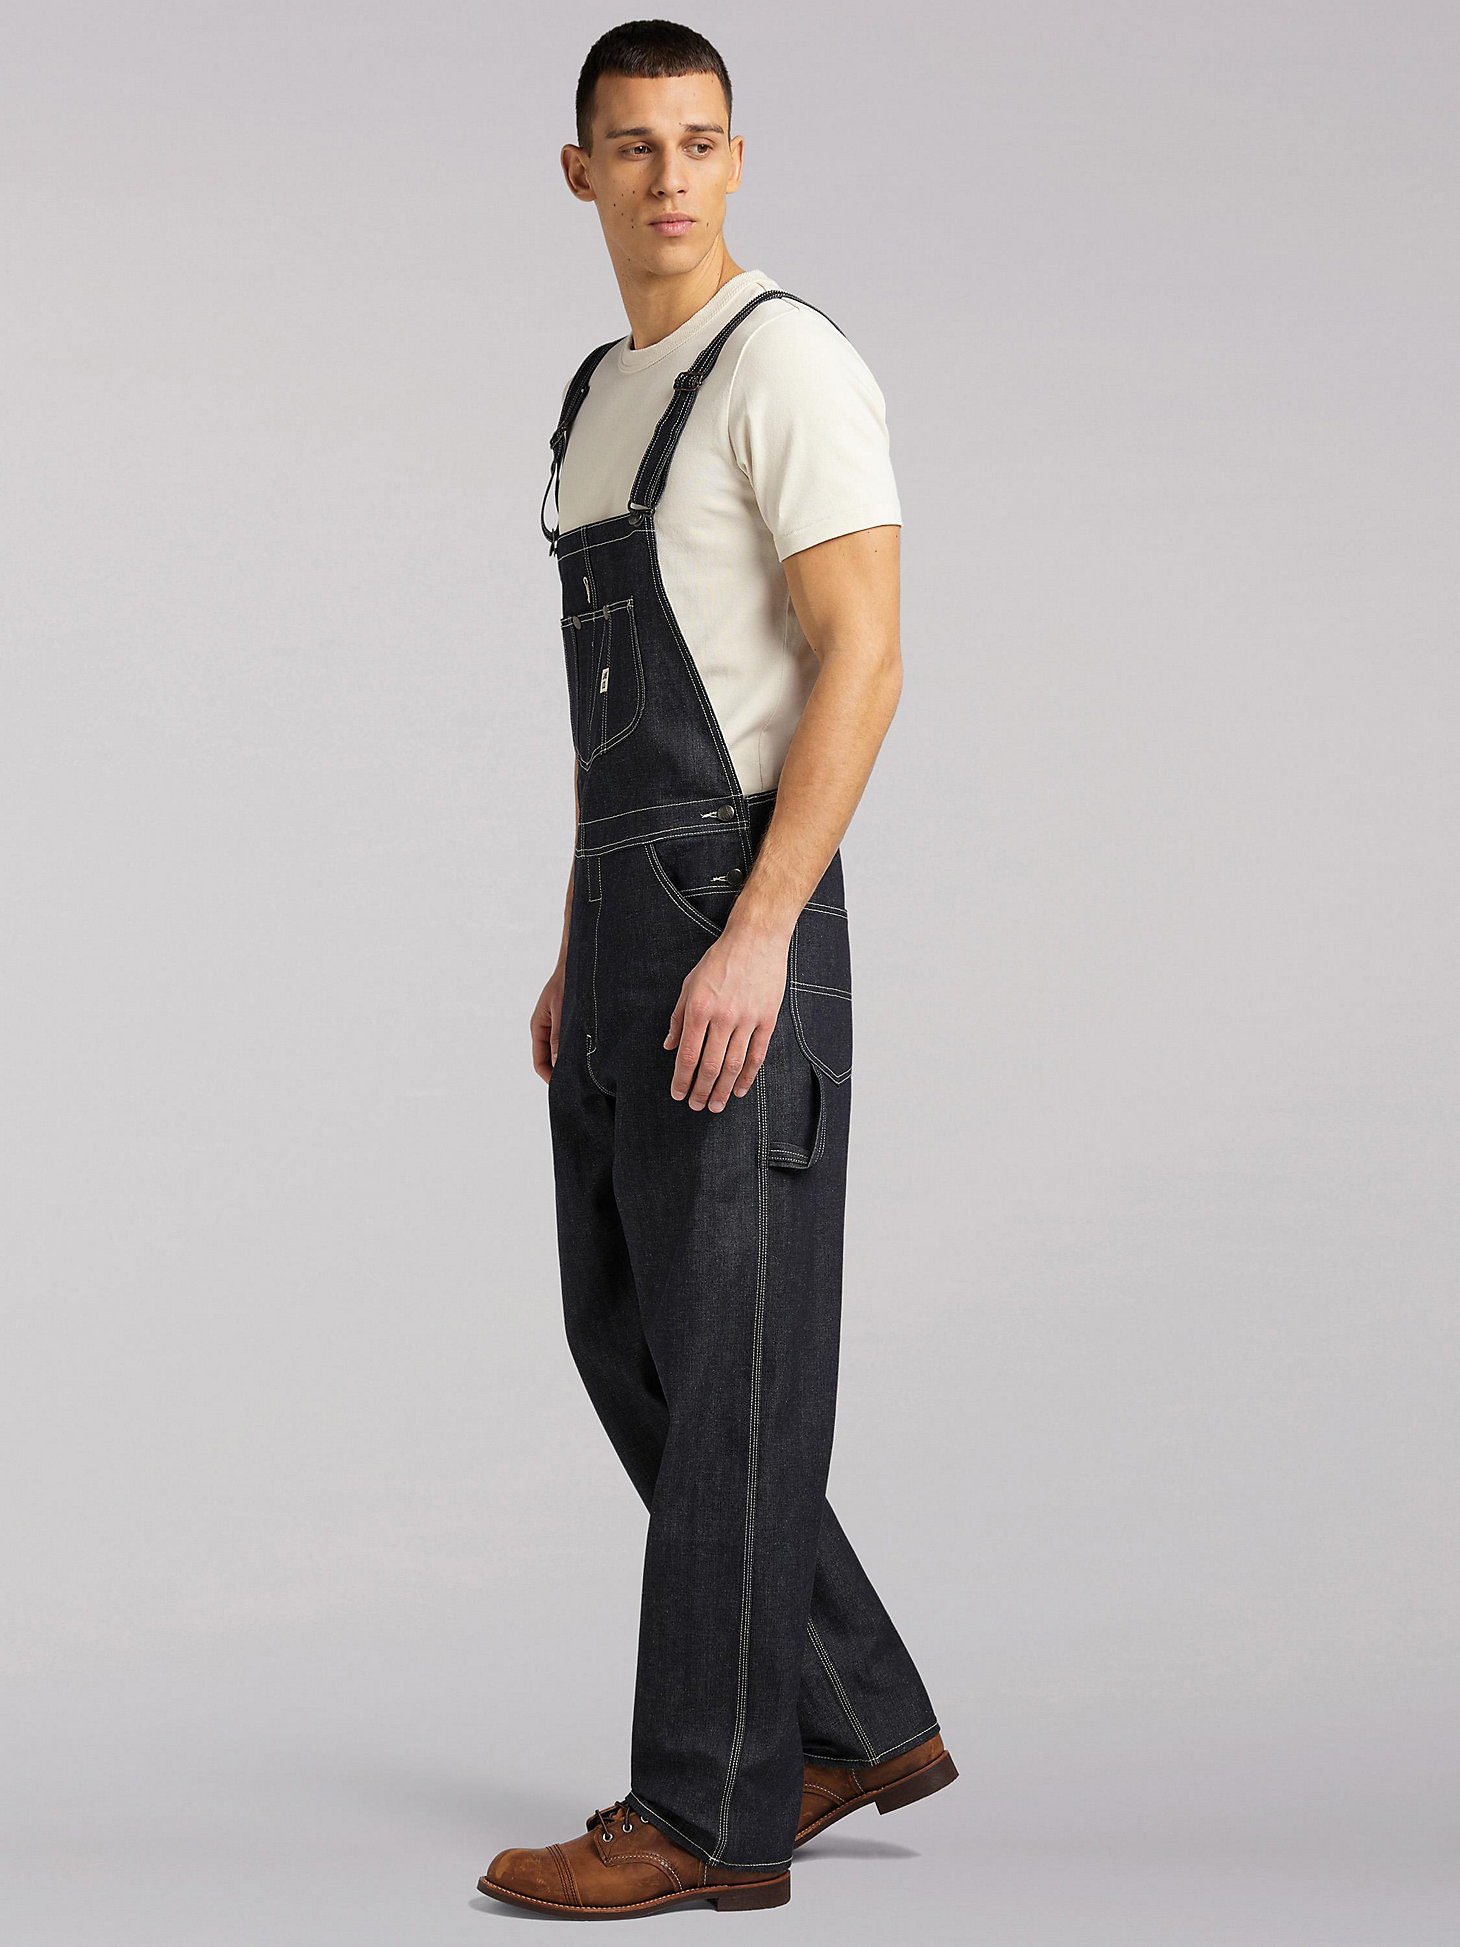 Men's Lee 101 Relaxed Fit Bib Overall in Dry alternative view 2